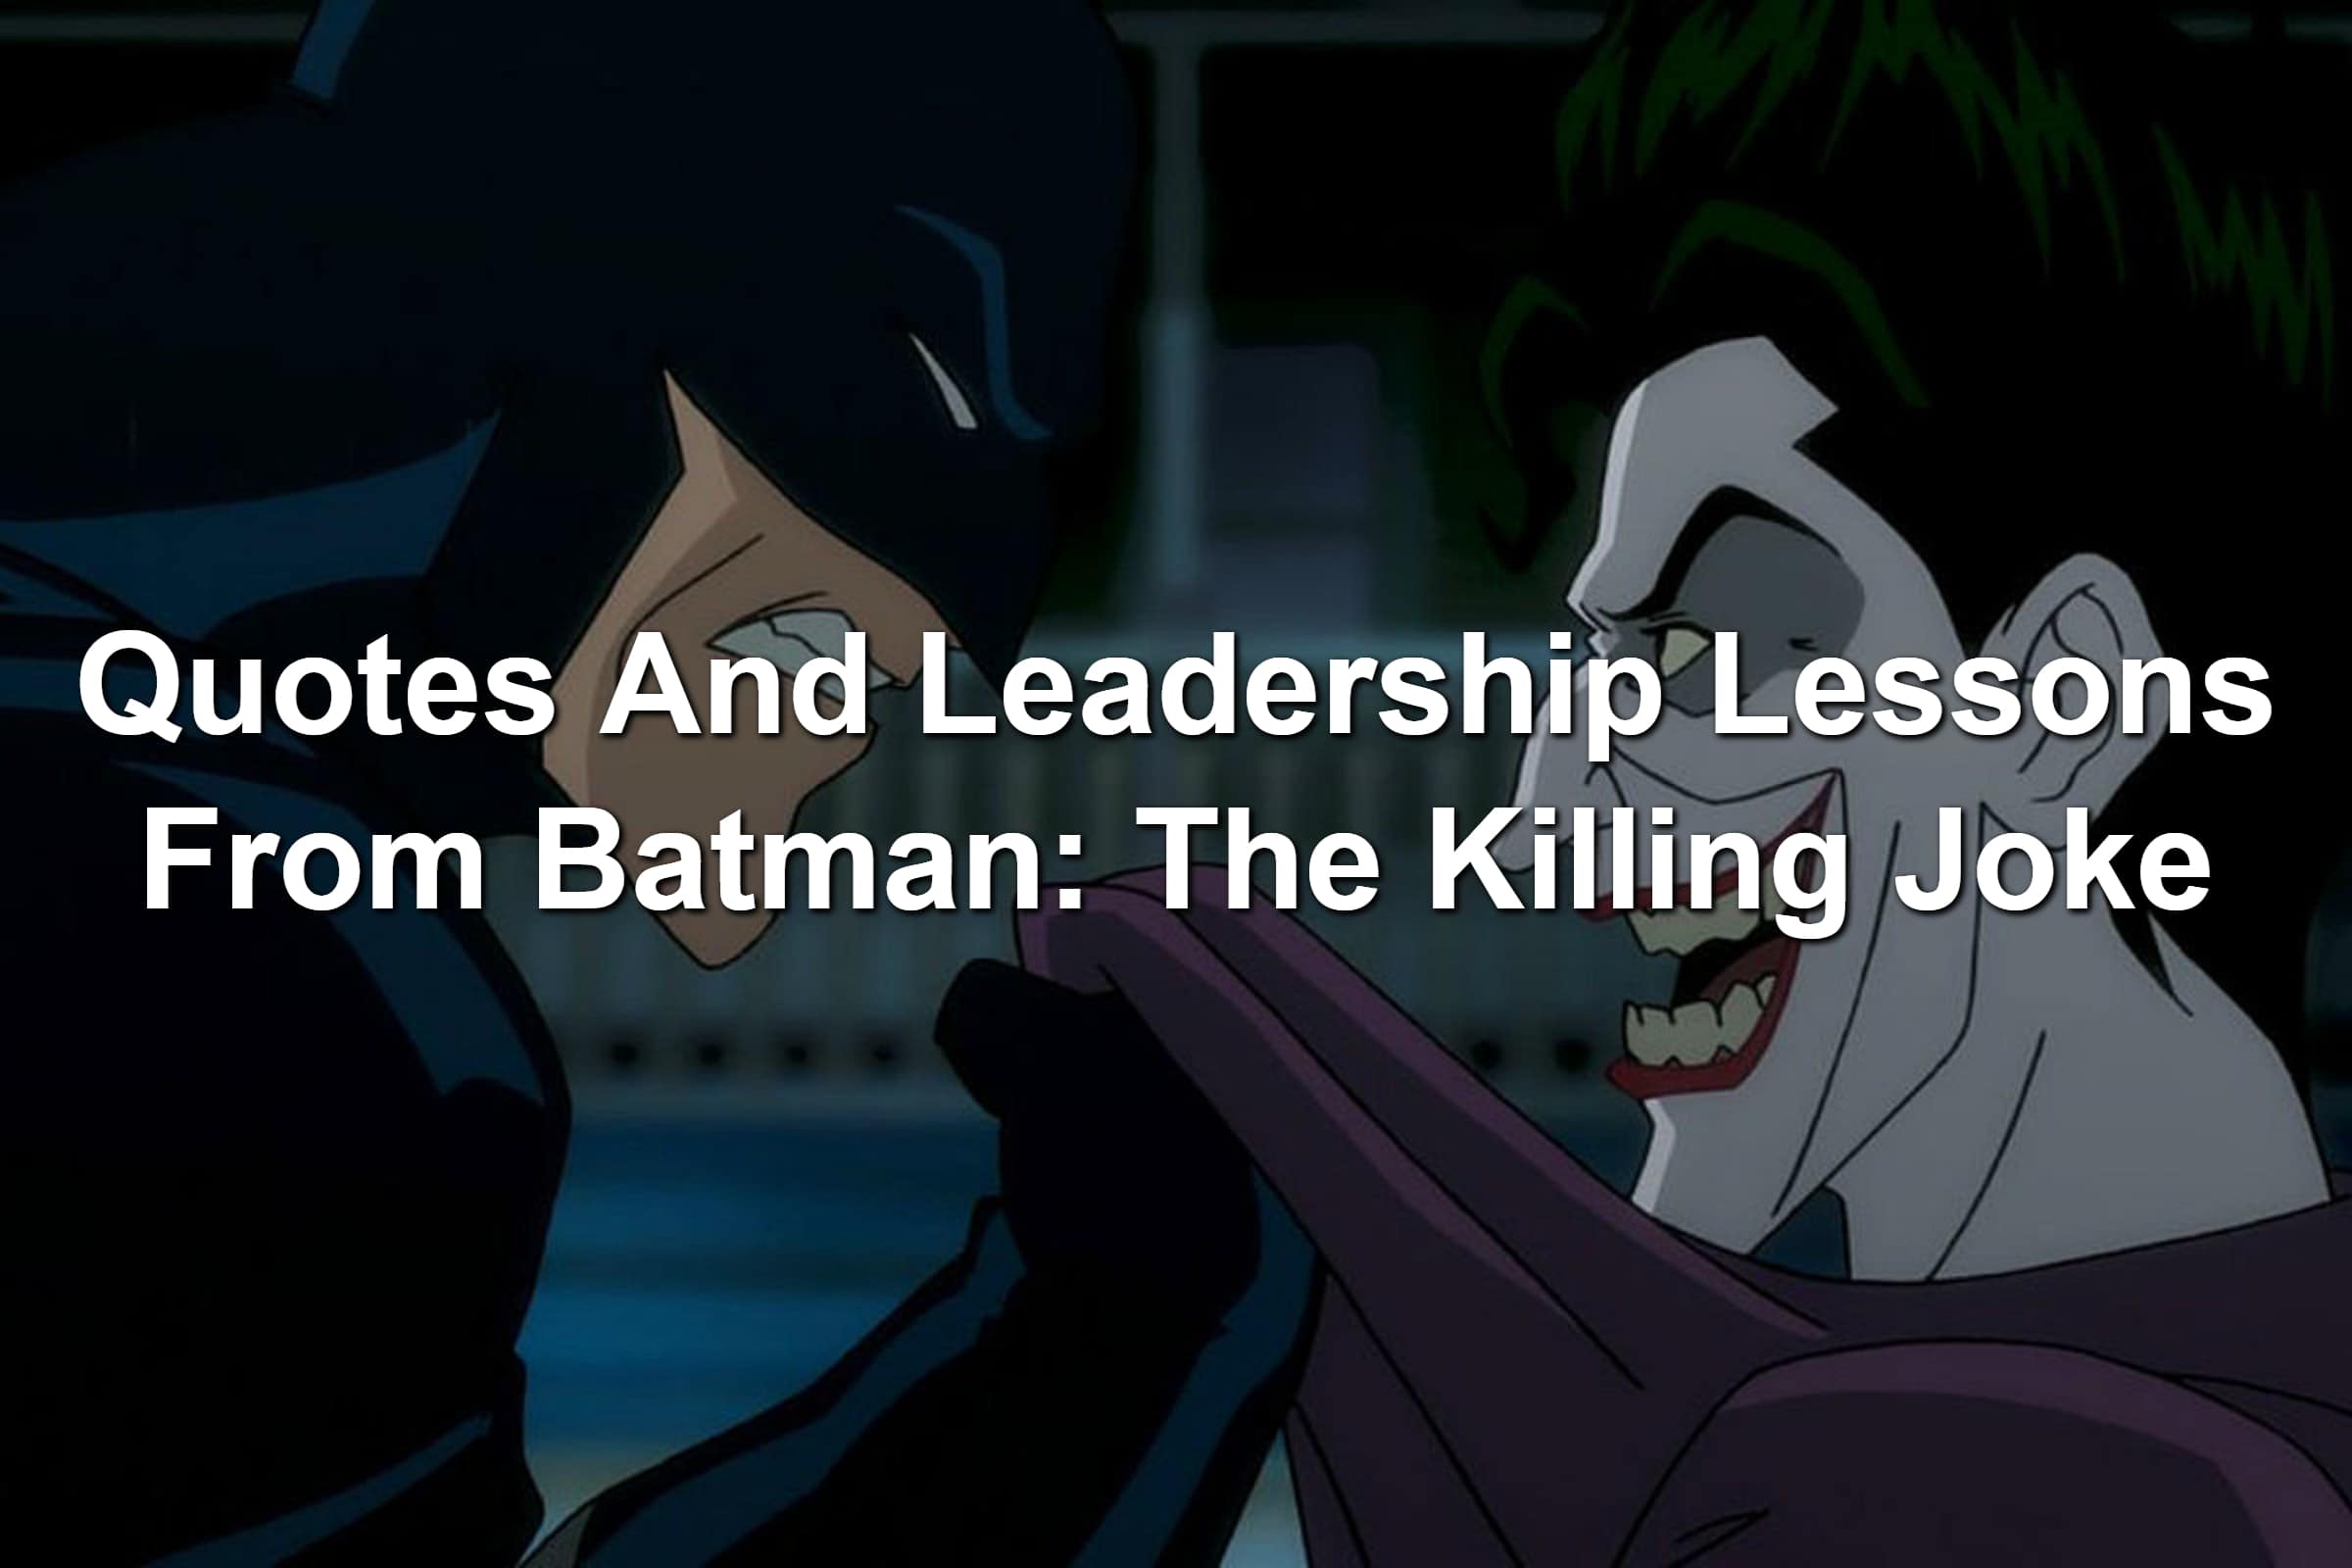 Quotes And Leadership Lessons From Batman: The Killing Joke